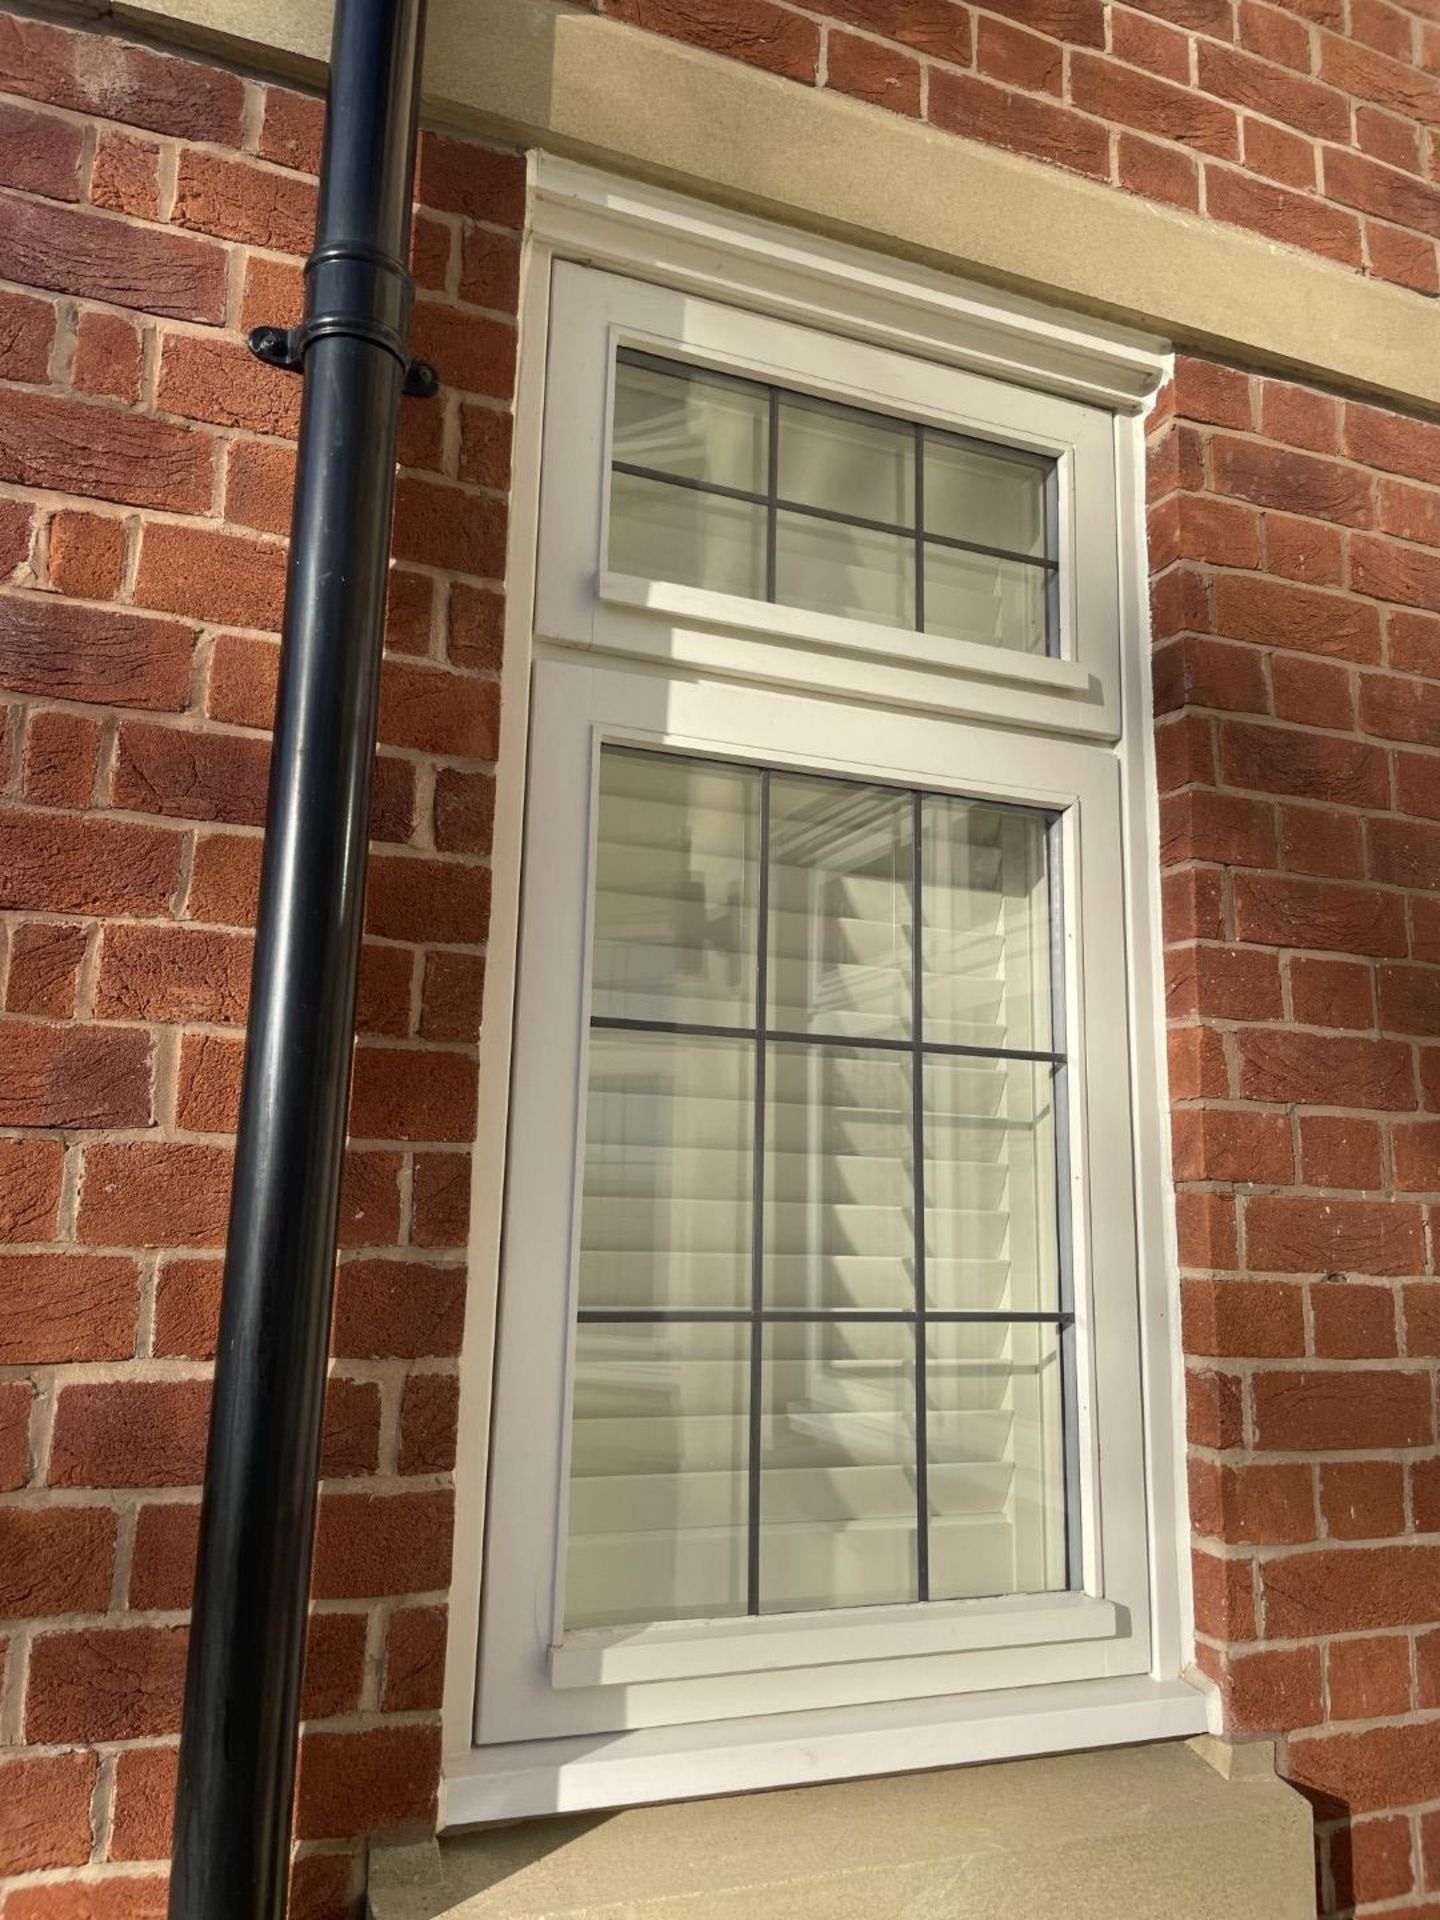 1 x Hardwood Timber Double Glazed Window Frames fitted with Shutter Blinds, In White - Ref: PAN106 - Image 17 of 23